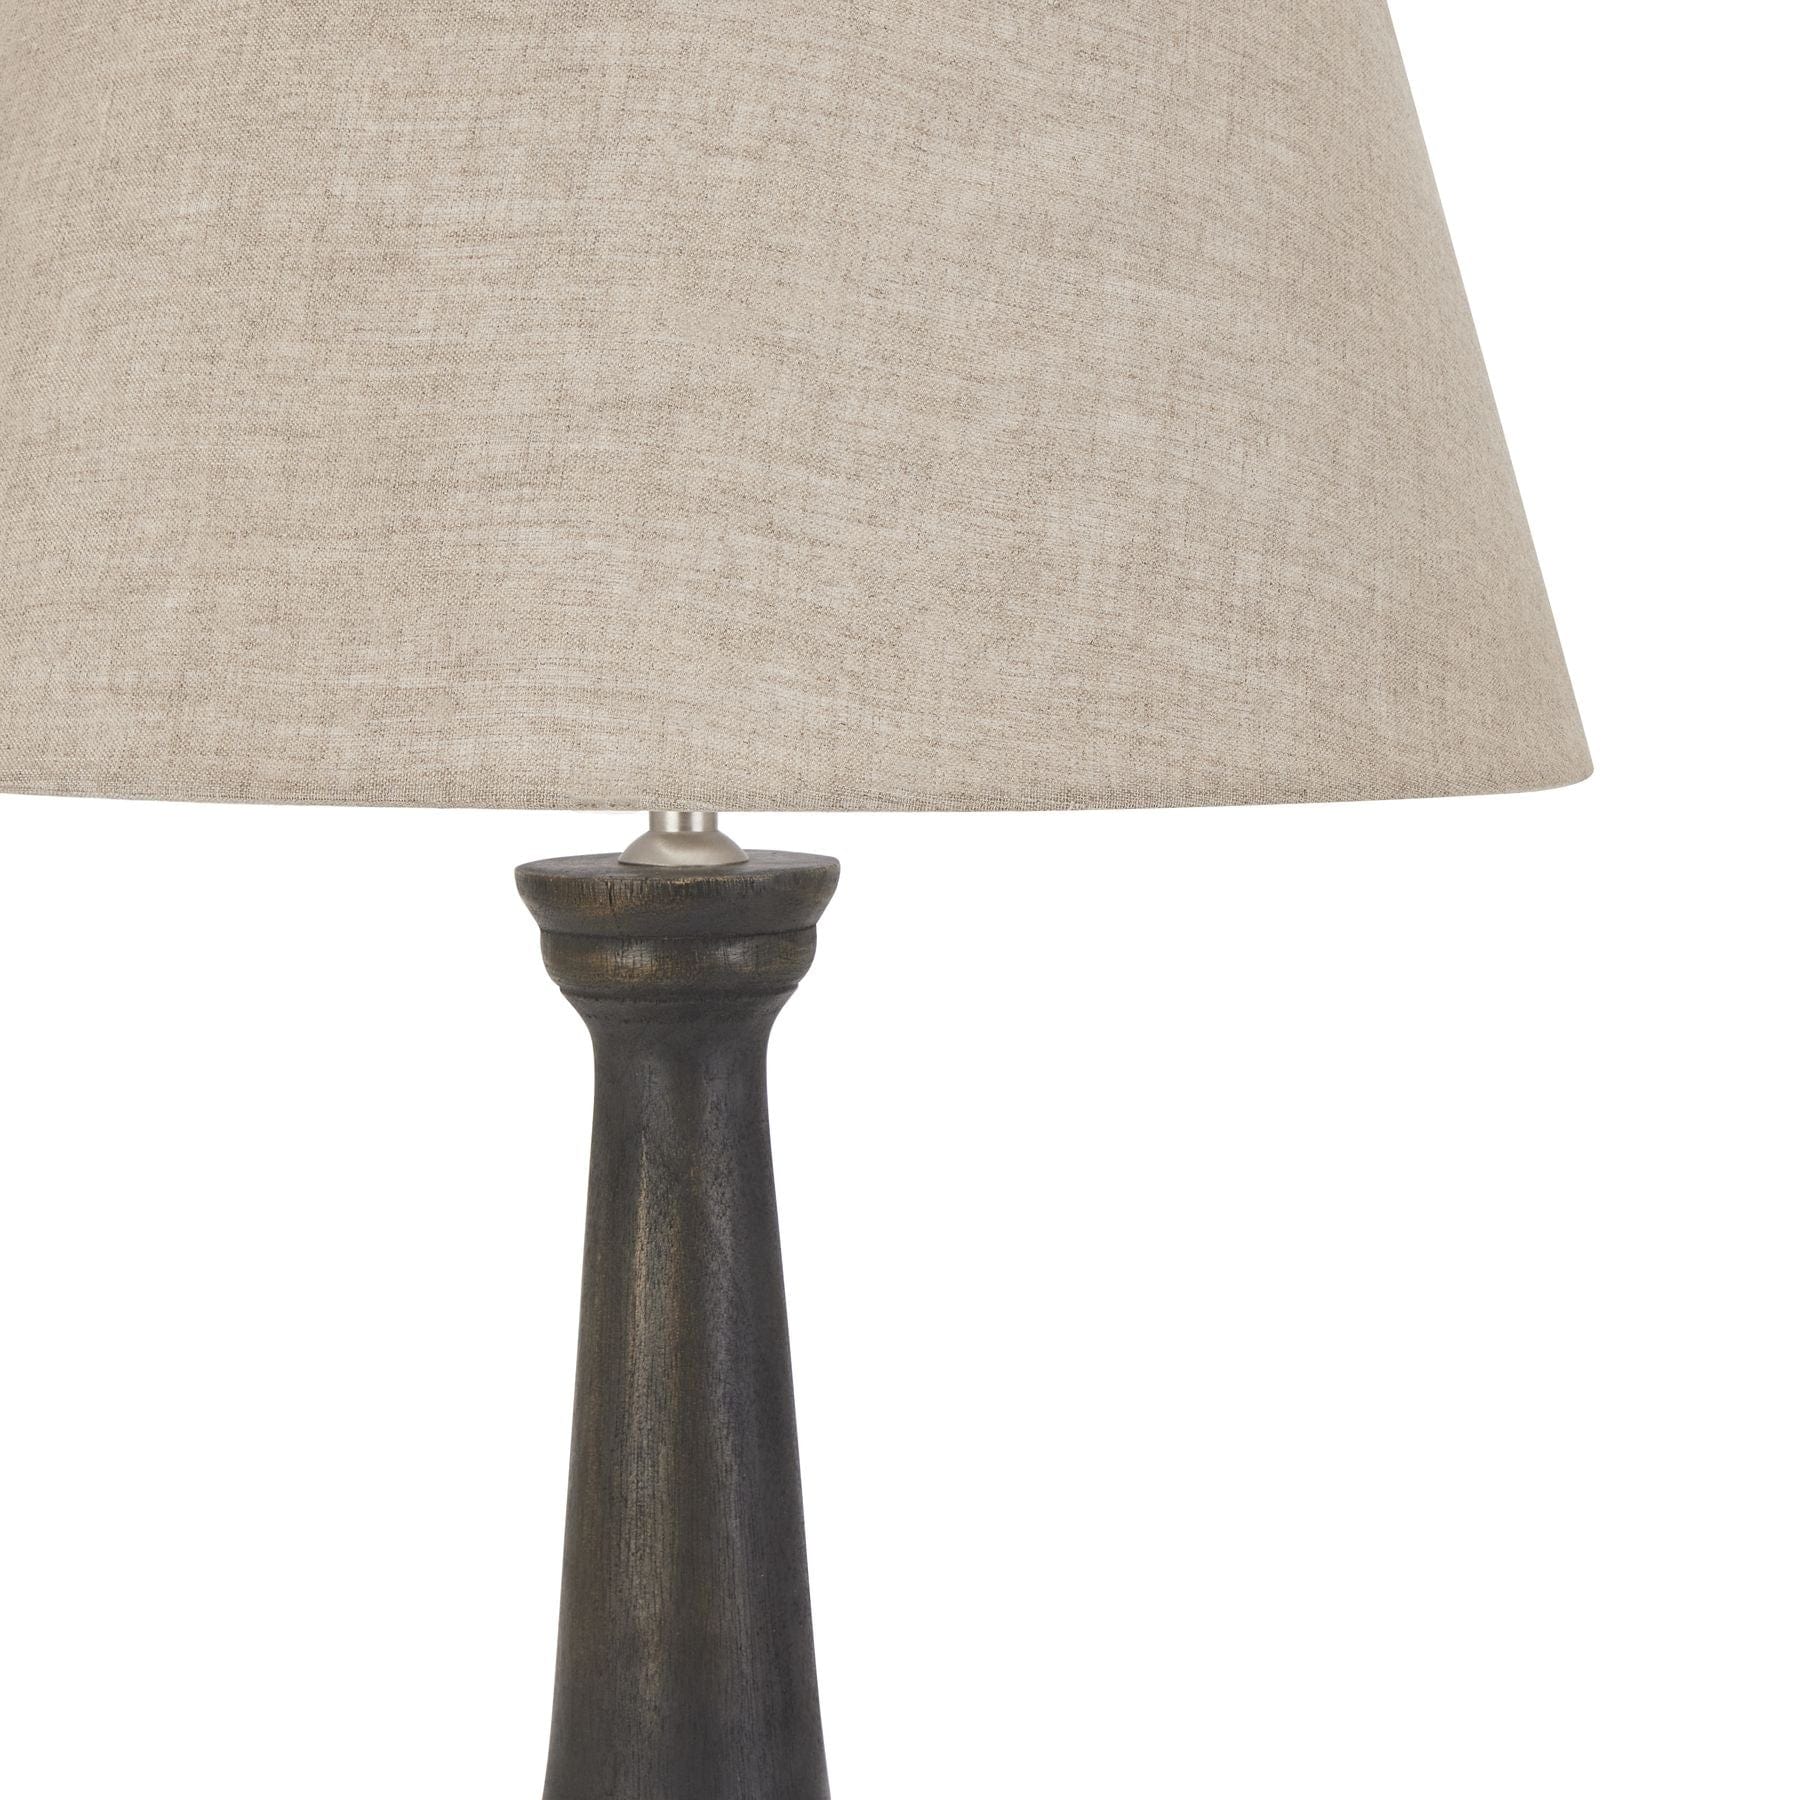 Hill Interiors Table Lamp Delaney Grey Goblet Candlestick Table Lamp With Linen Shade